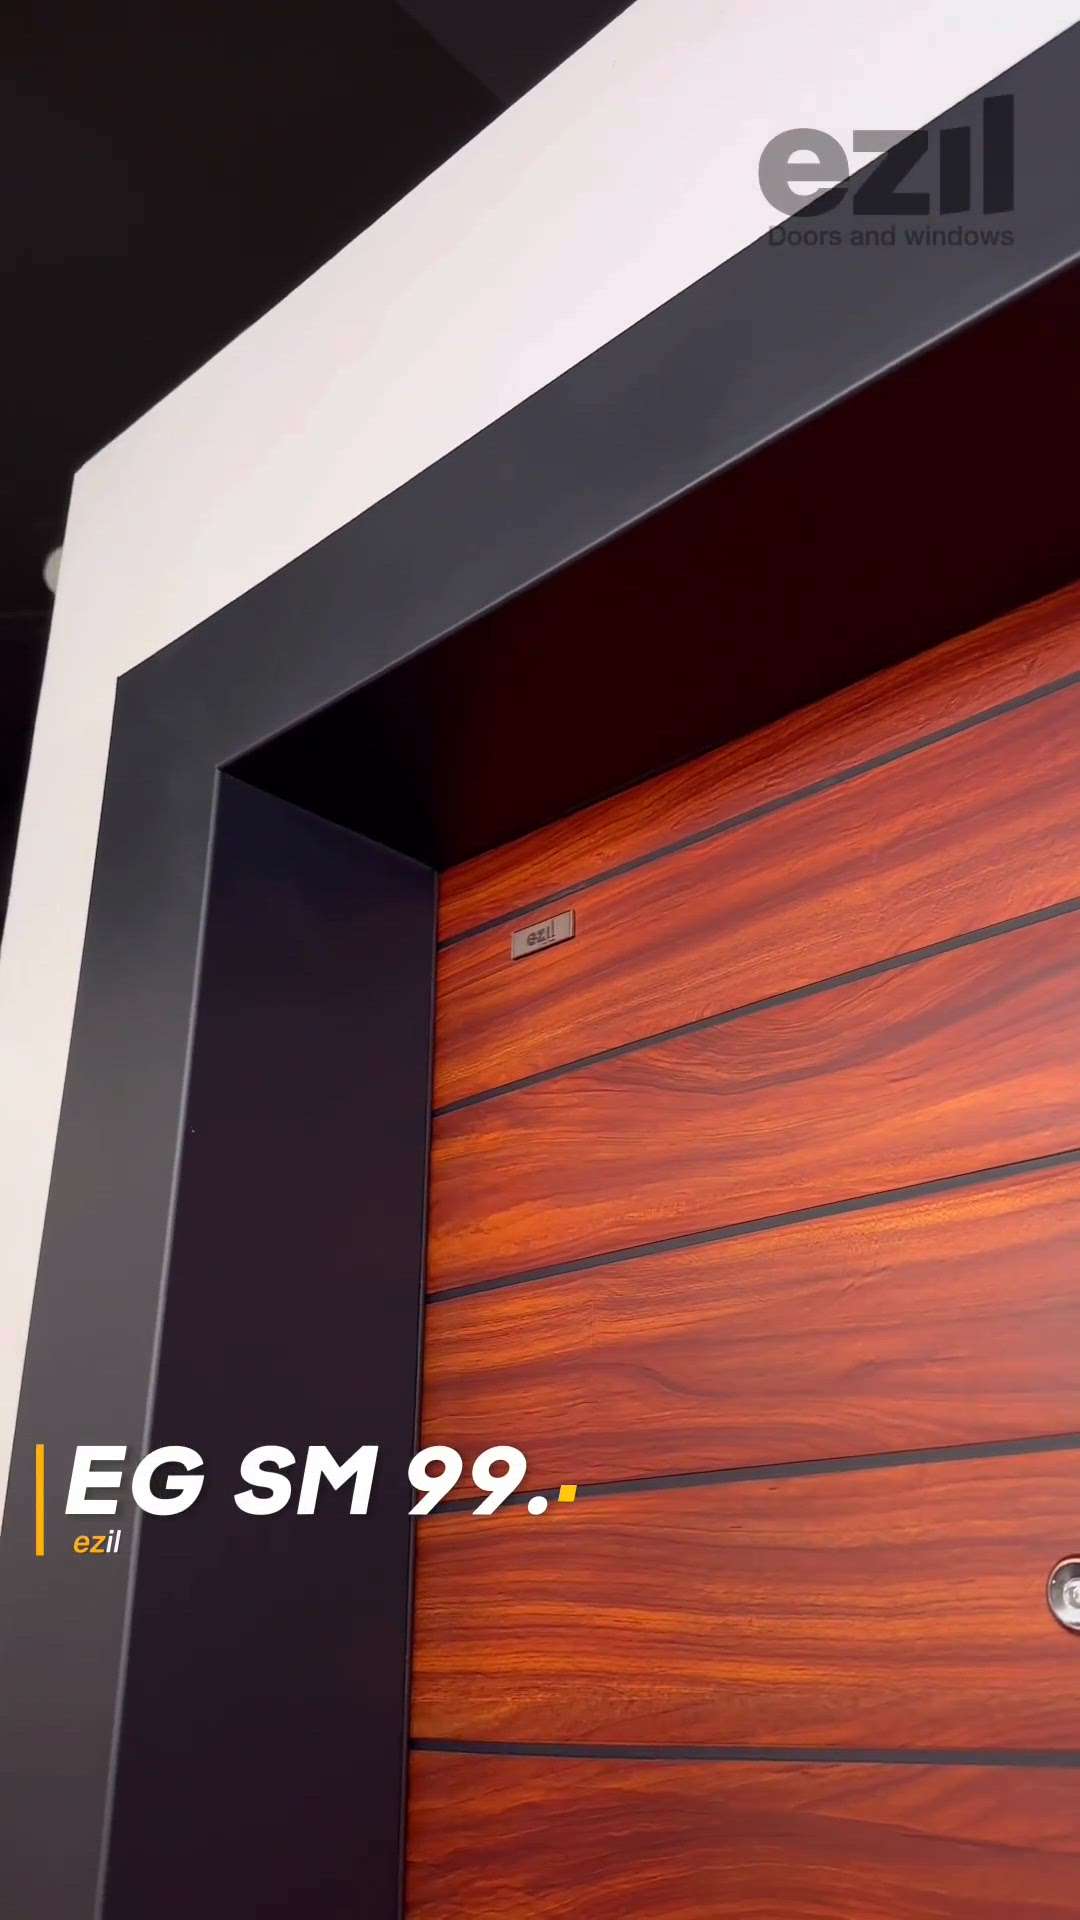 EG SM 99

Step into a world where safety meets elegance!

🚪Introducing Ezil GI Doors from i-Leaf – where every design detail ensures the guardianship of your haven.

Crafted with high-quality GI sheets and adorned with stunning wooden textures, our doors are not just about aesthetics; they are a shield for your home, equipped with multi-point locking systems for unparalleled protection.

#iLeafDoors #SteelDoorsandWindows #securitydoors #Homesecurity #HomeDecor #doorsandwindows #SteelDoors #DoubleDoors #steeldoordesign #steelsafetydoor #beststeeldoor #securitydoor #homedoor #classicdoor #longlasting #superiorquality #qualitysteel #bestdoors #doorshop #safetydoor #qualitydoors #affordabledoors #bestdoorever